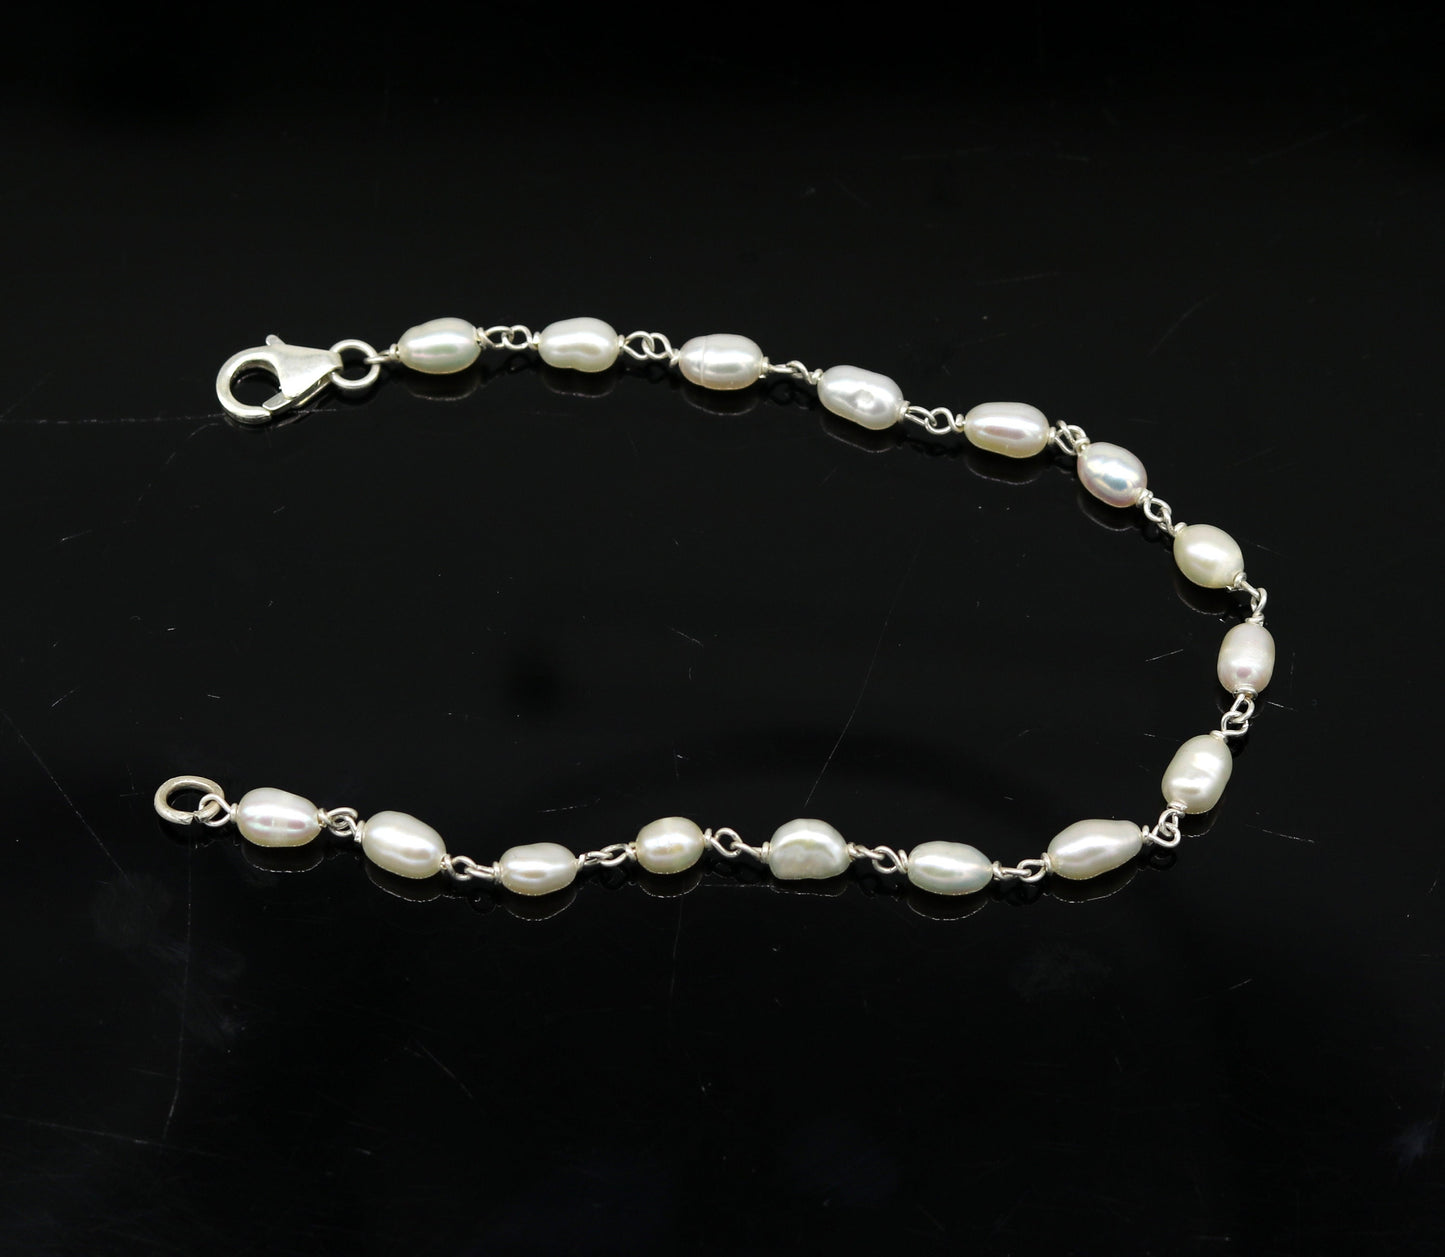 7.5" inches 925 sterling silver handmade customized beaded bracelet, awesome natural pearl unisex bracelet gifting jewelry for girls nsbr190 - TRIBAL ORNAMENTS